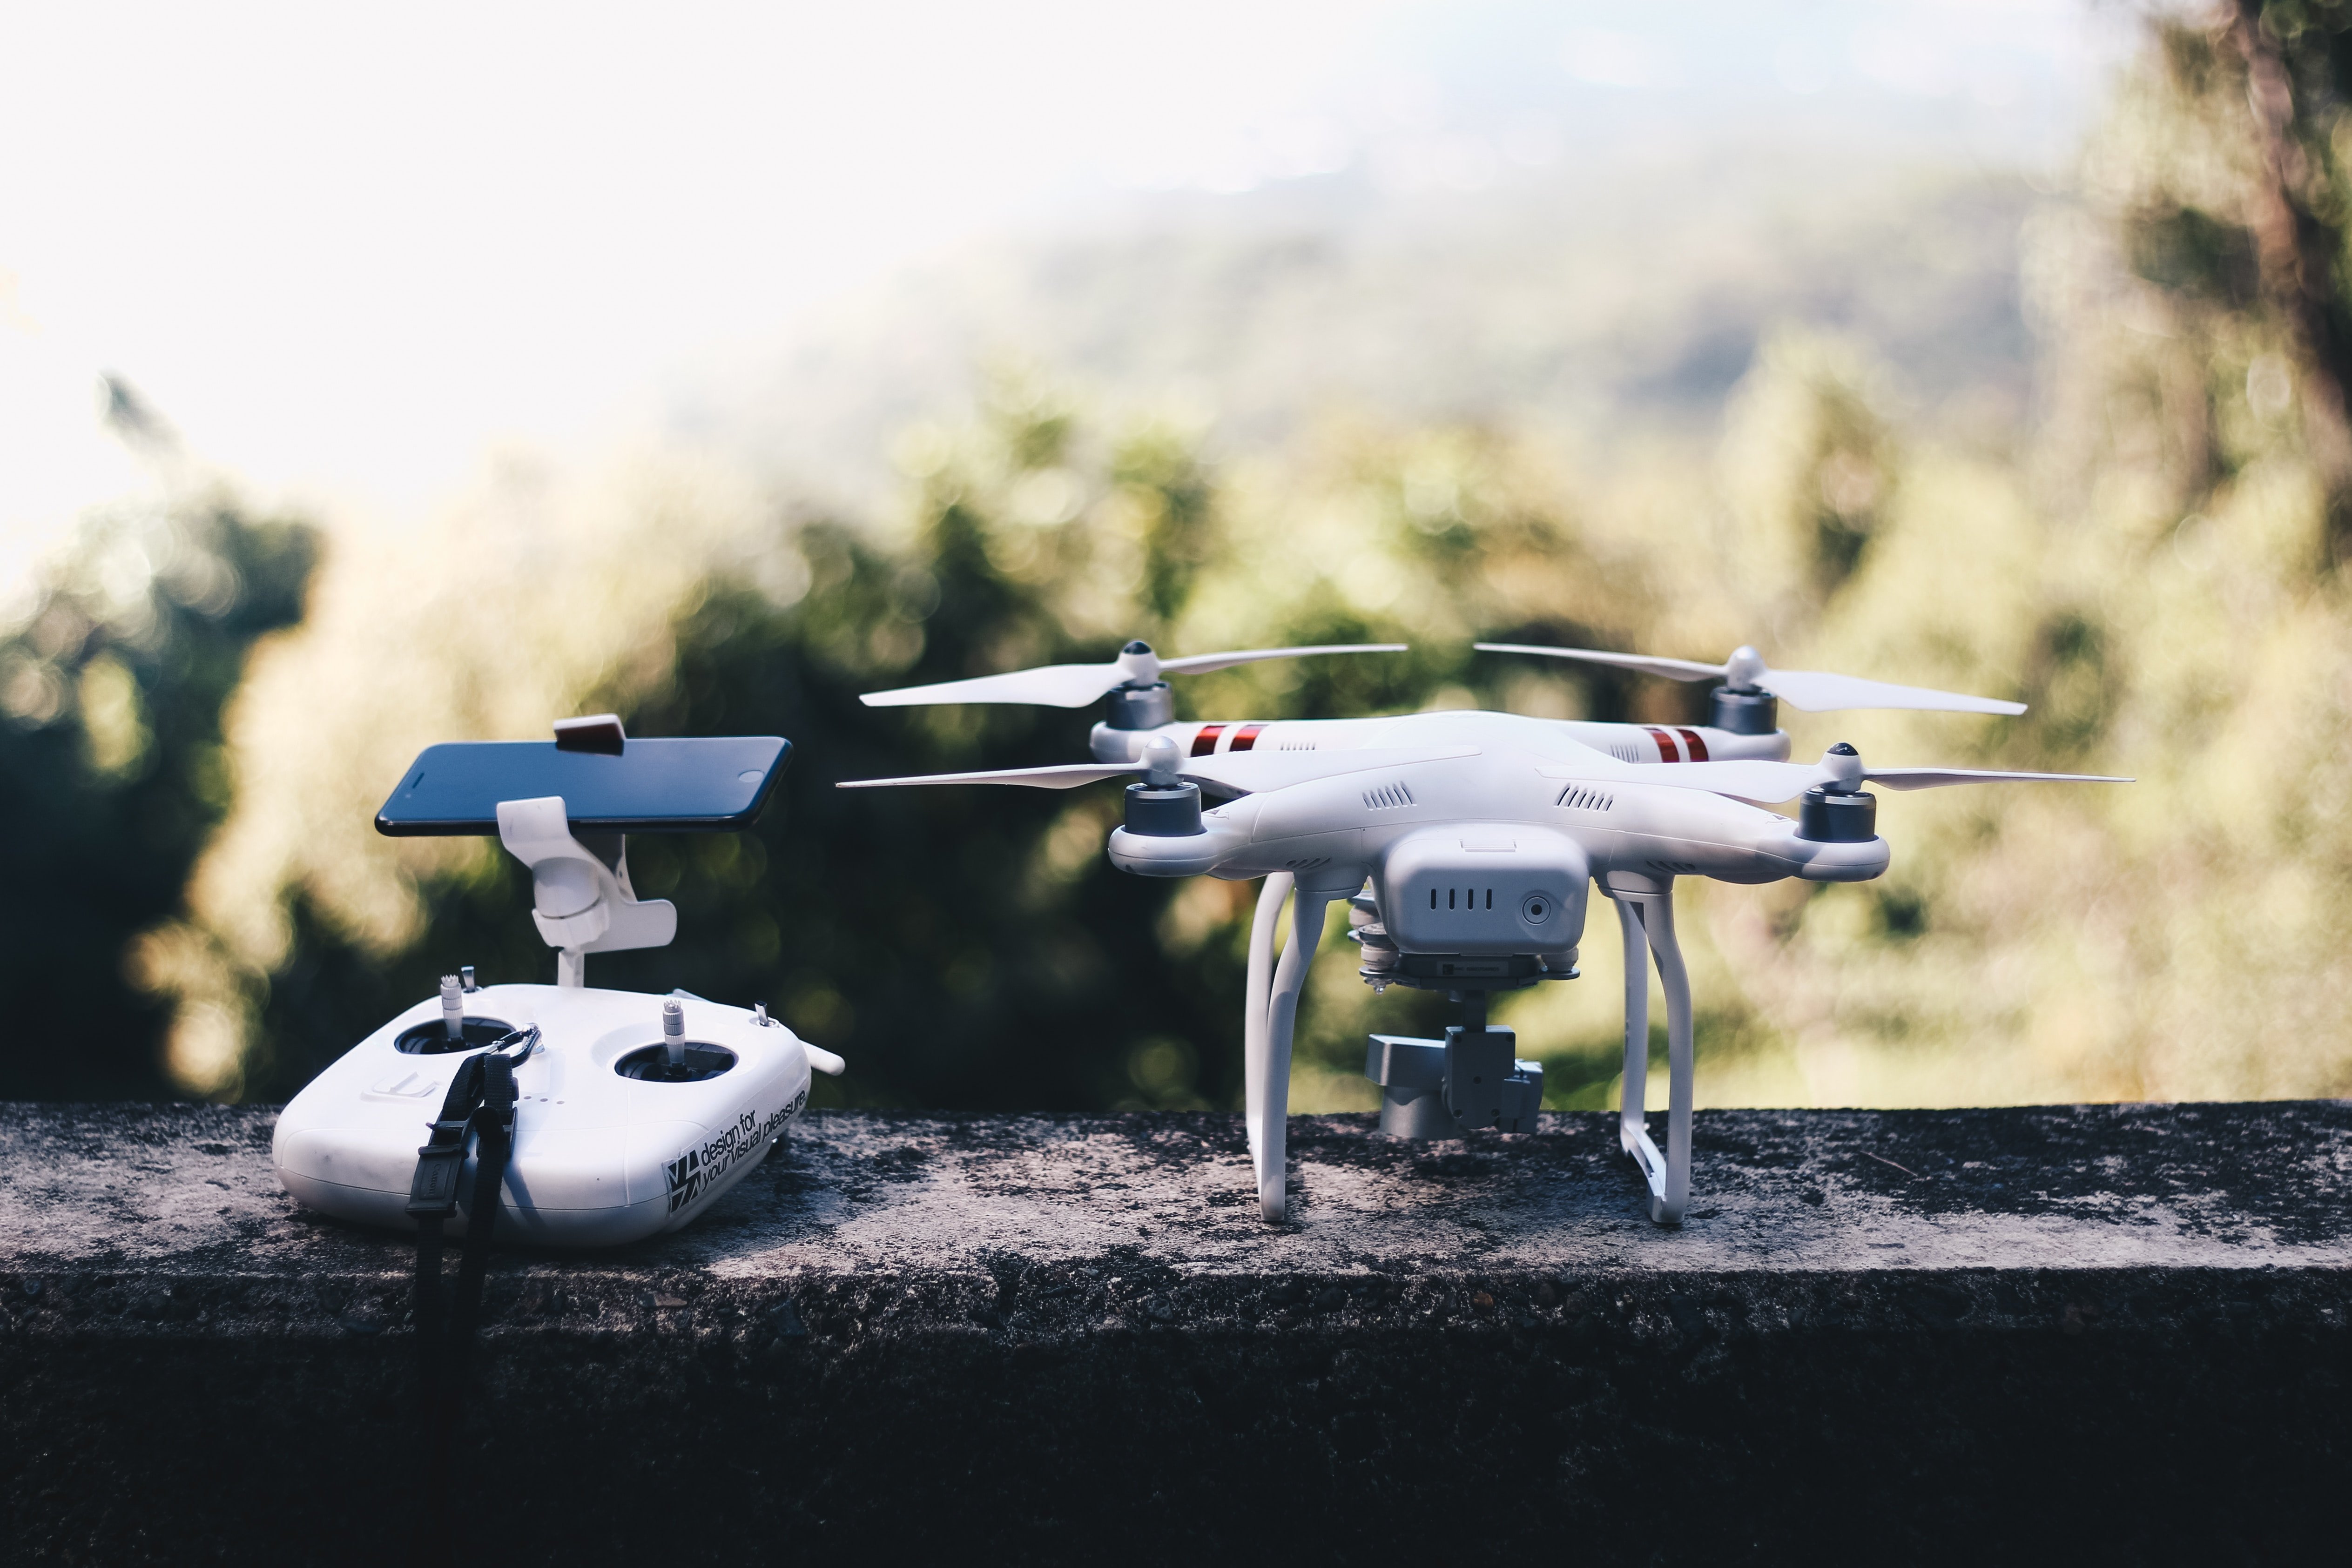 2019 US drone law updates